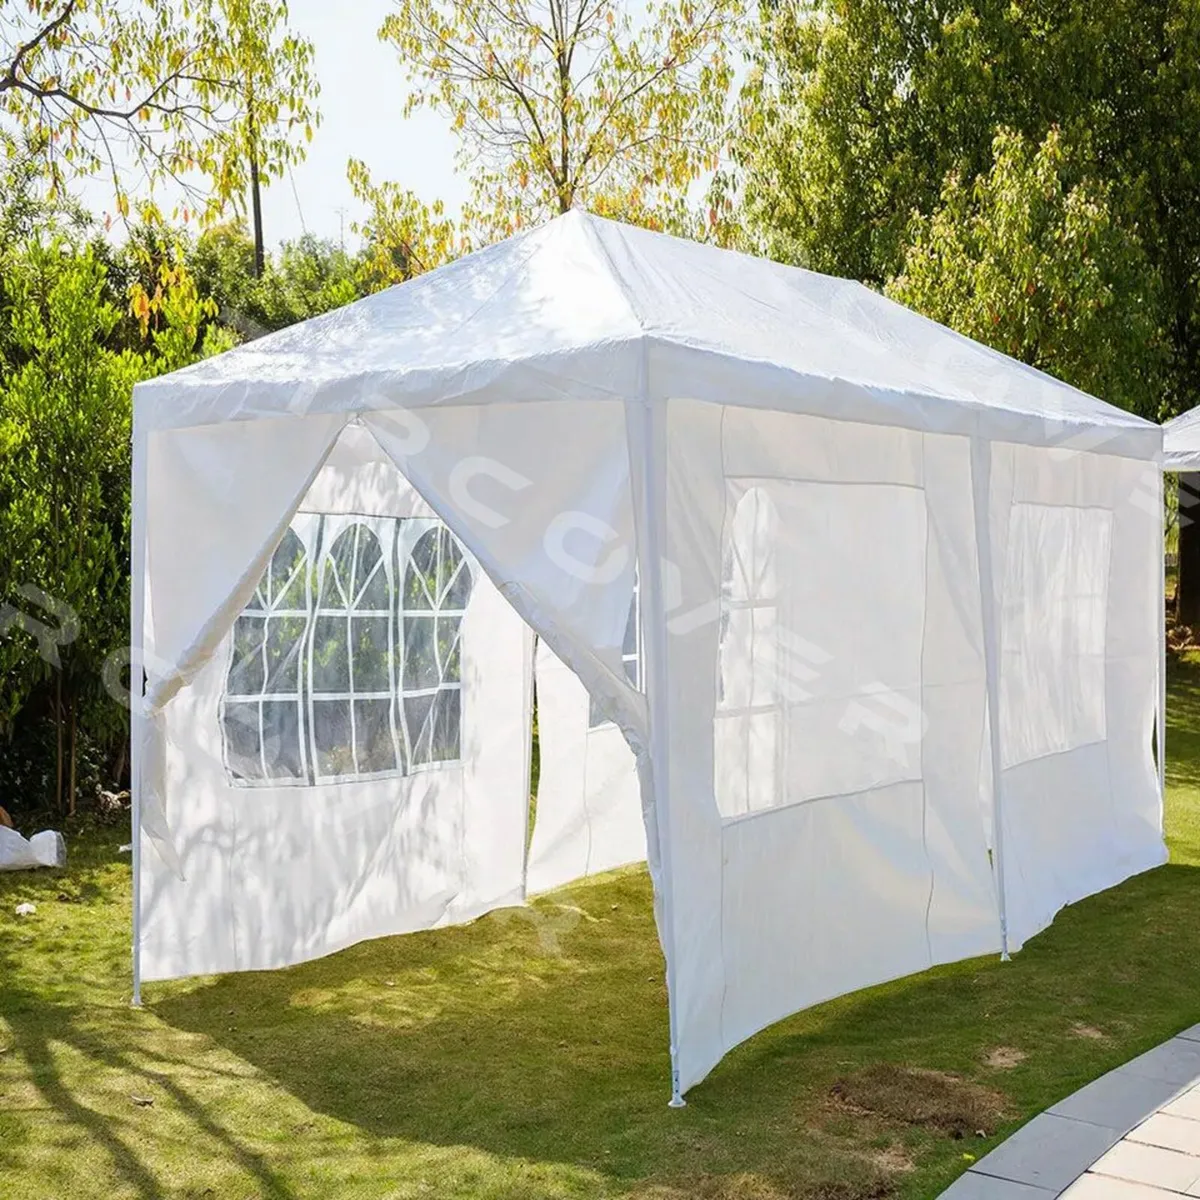 Canopy Tent - 3m x 9m fully enclosed FREE Shipping - Image 1